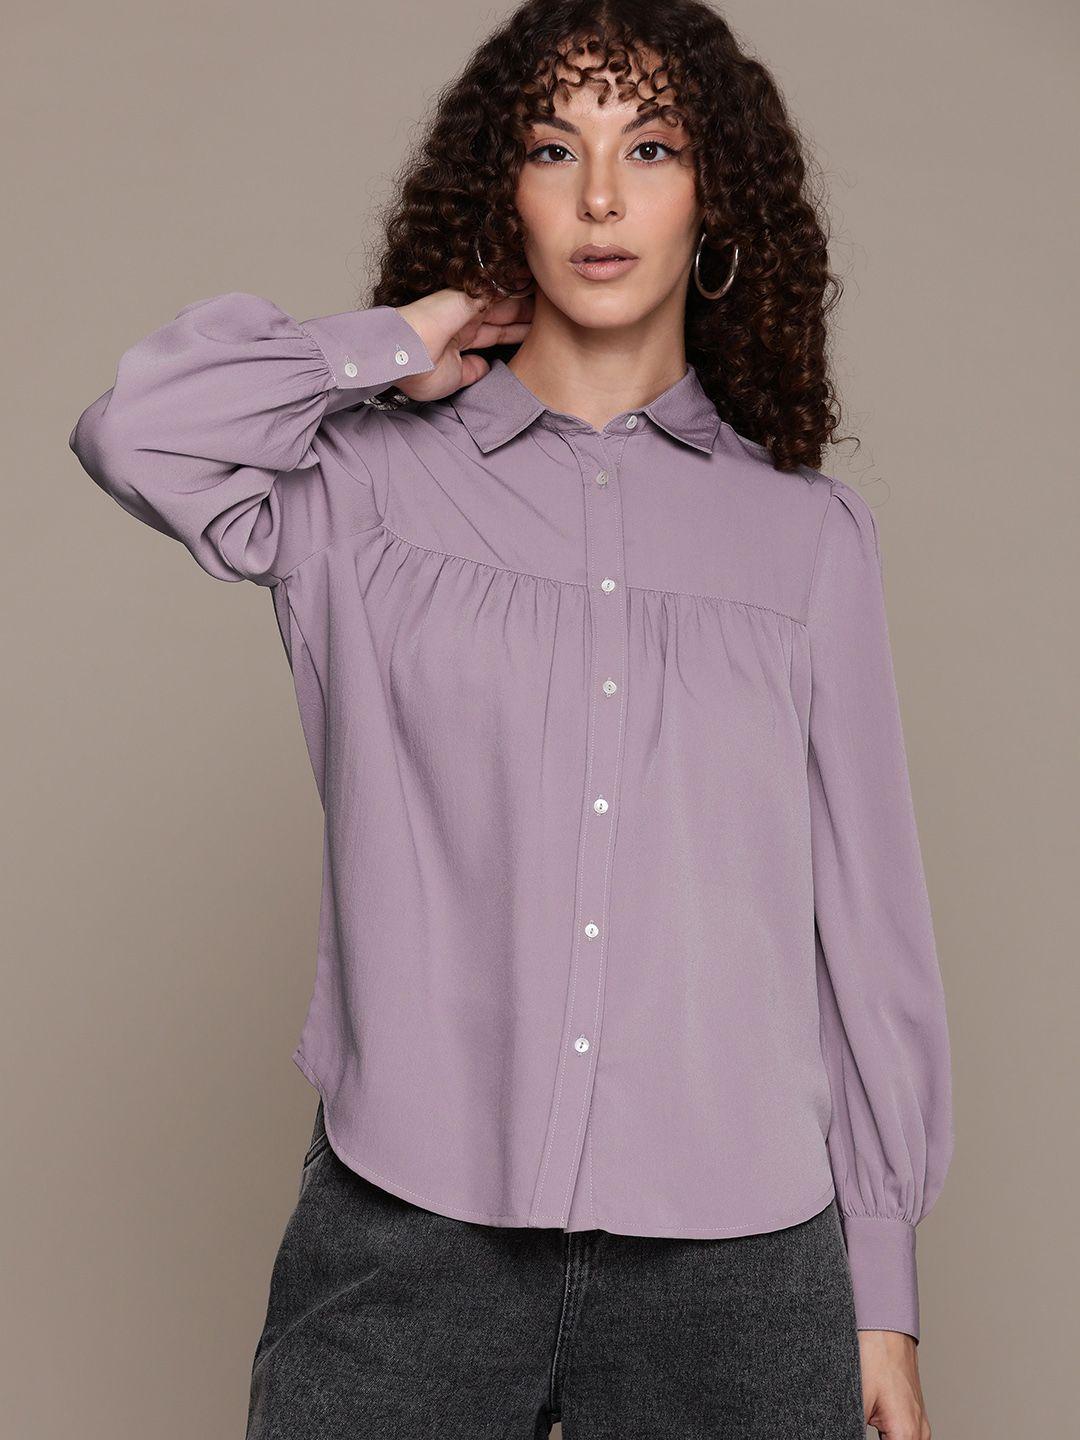 the roadster lifestyle co. solid pleated casual shirt